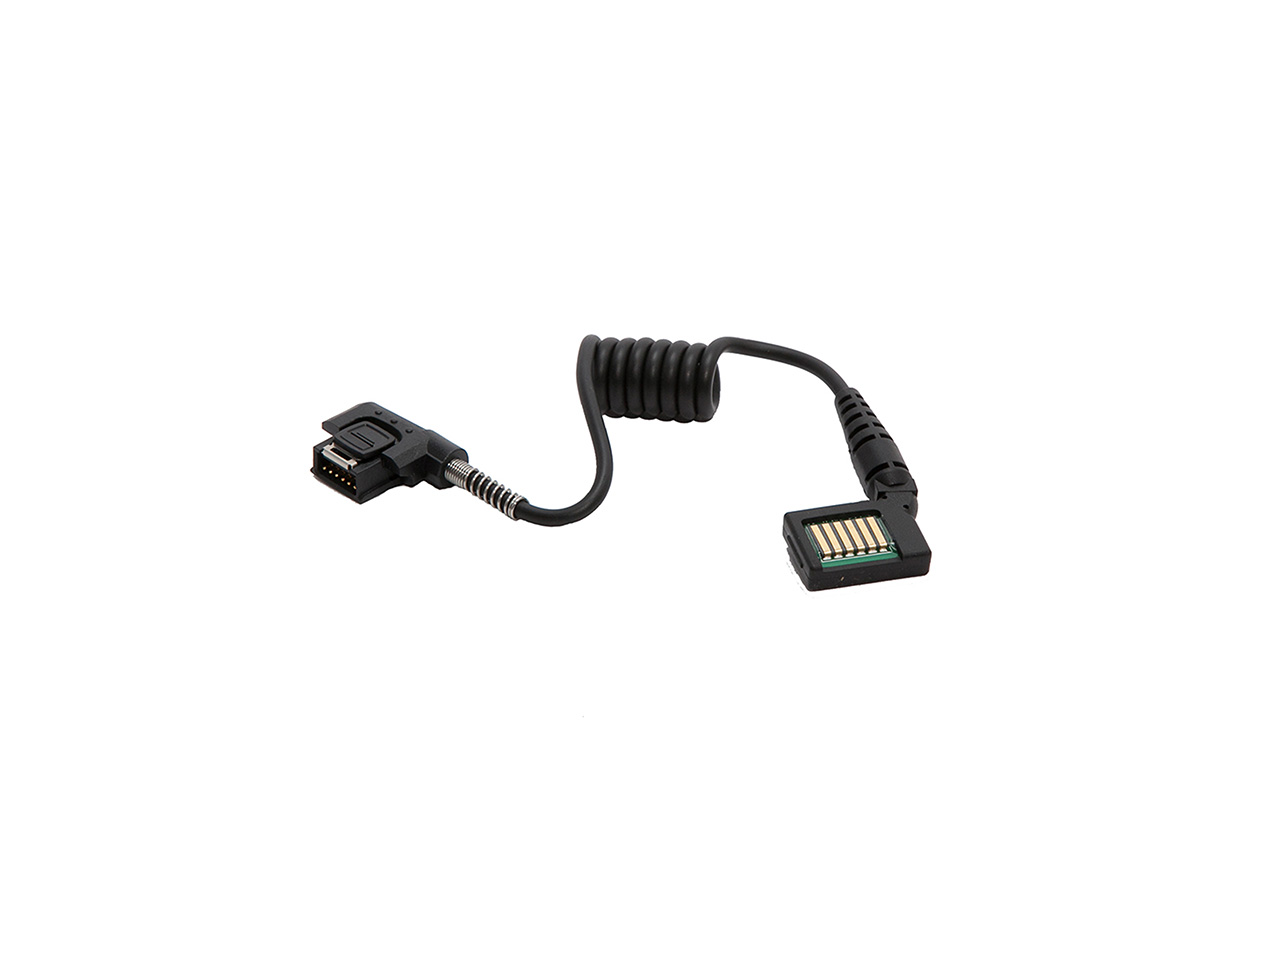 CE203B-Handheld-400X-Series-Battery-Cable.jpg